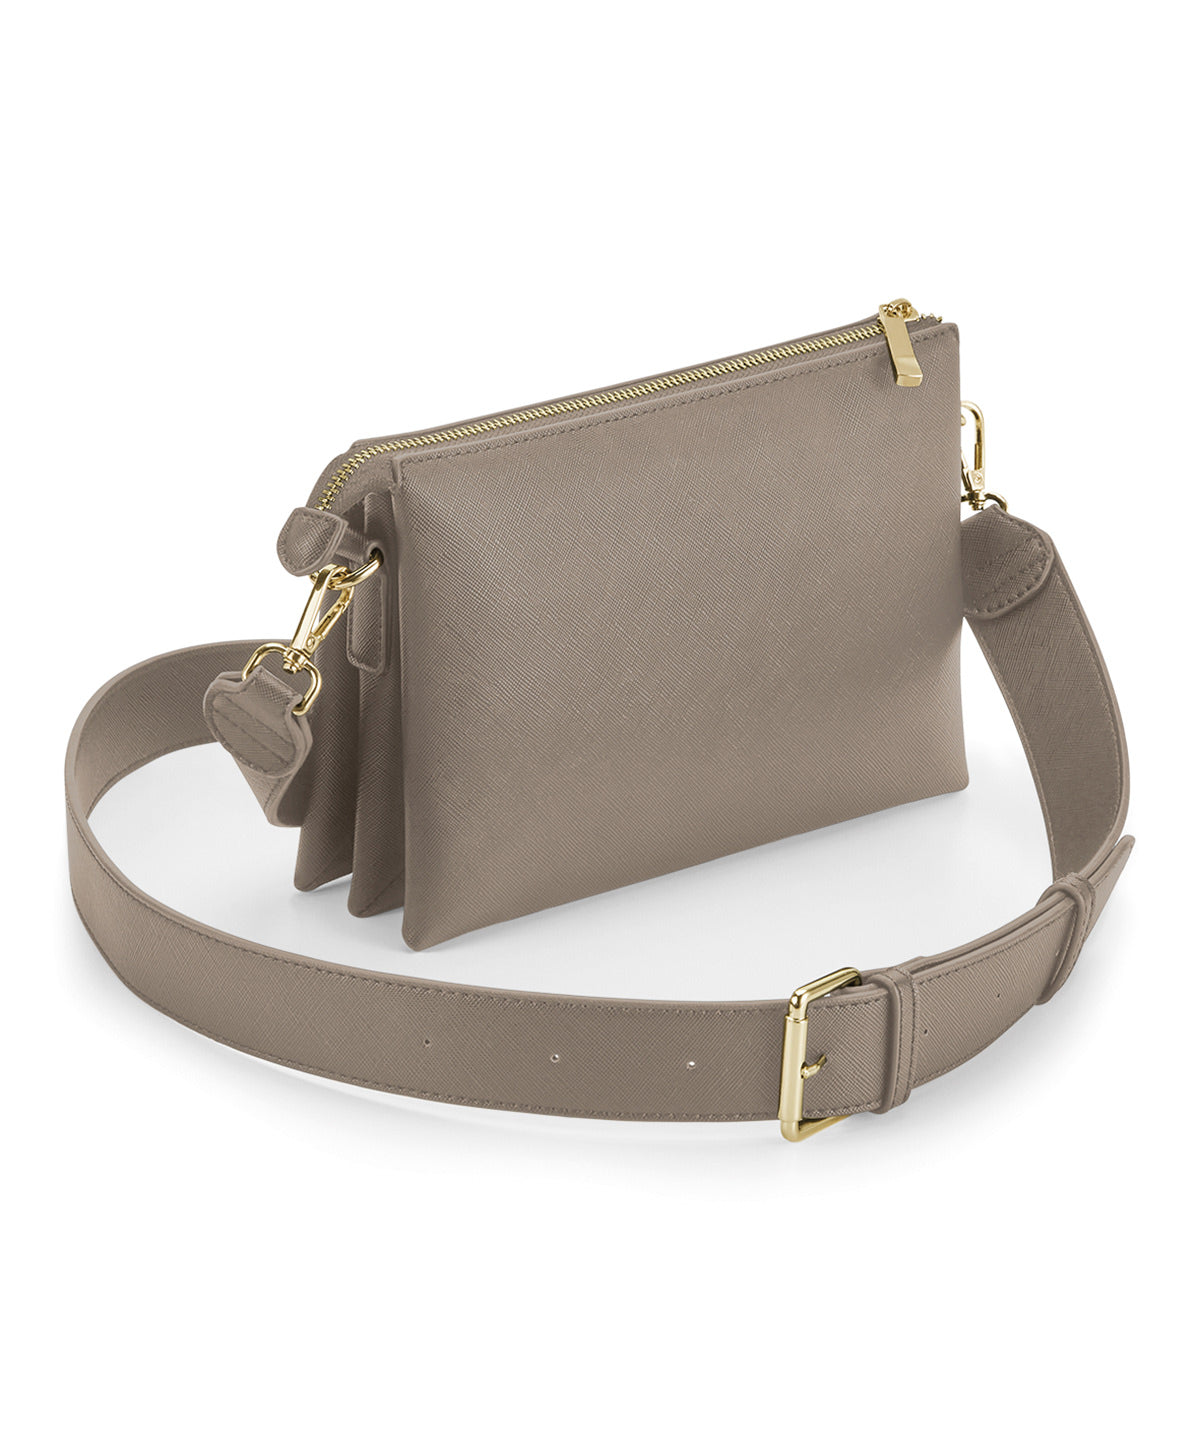 Personalised Bags - Tan Bagbase Boutique soft cross-body bag